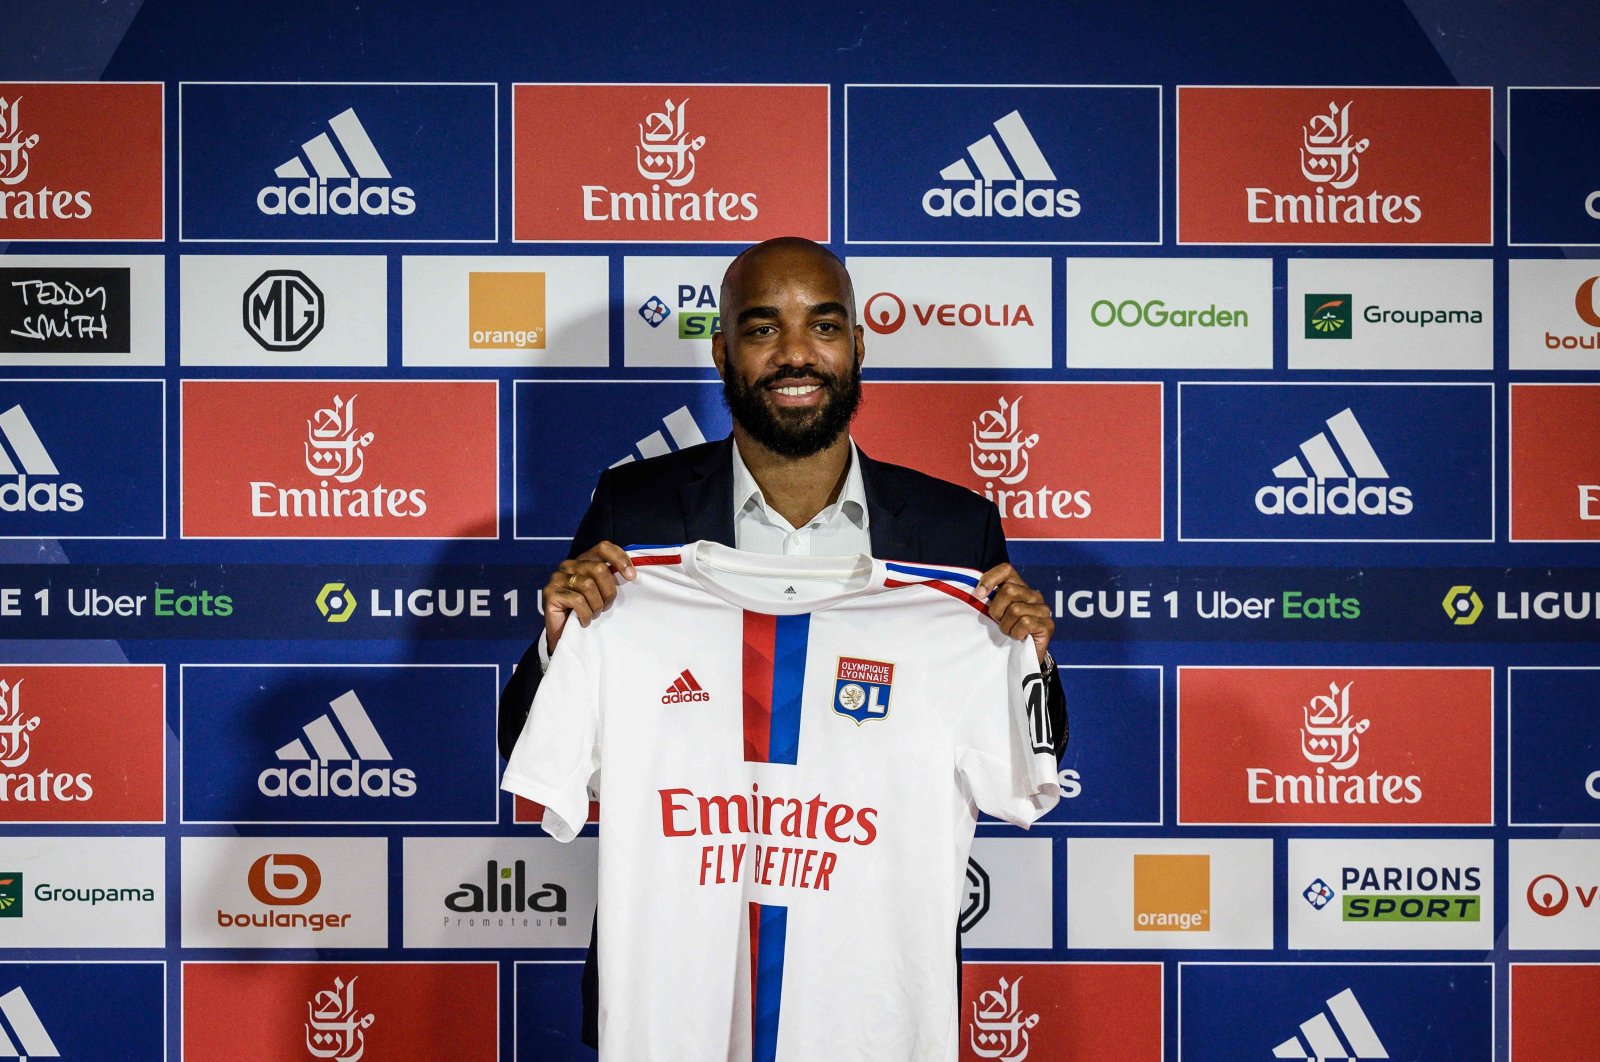 Former France international Alexandre Lacazette poses with his jersey during a press conference to announce his return to Lyon, Decines-Charpieu, France, June 9, 2022. (AFP Photo)